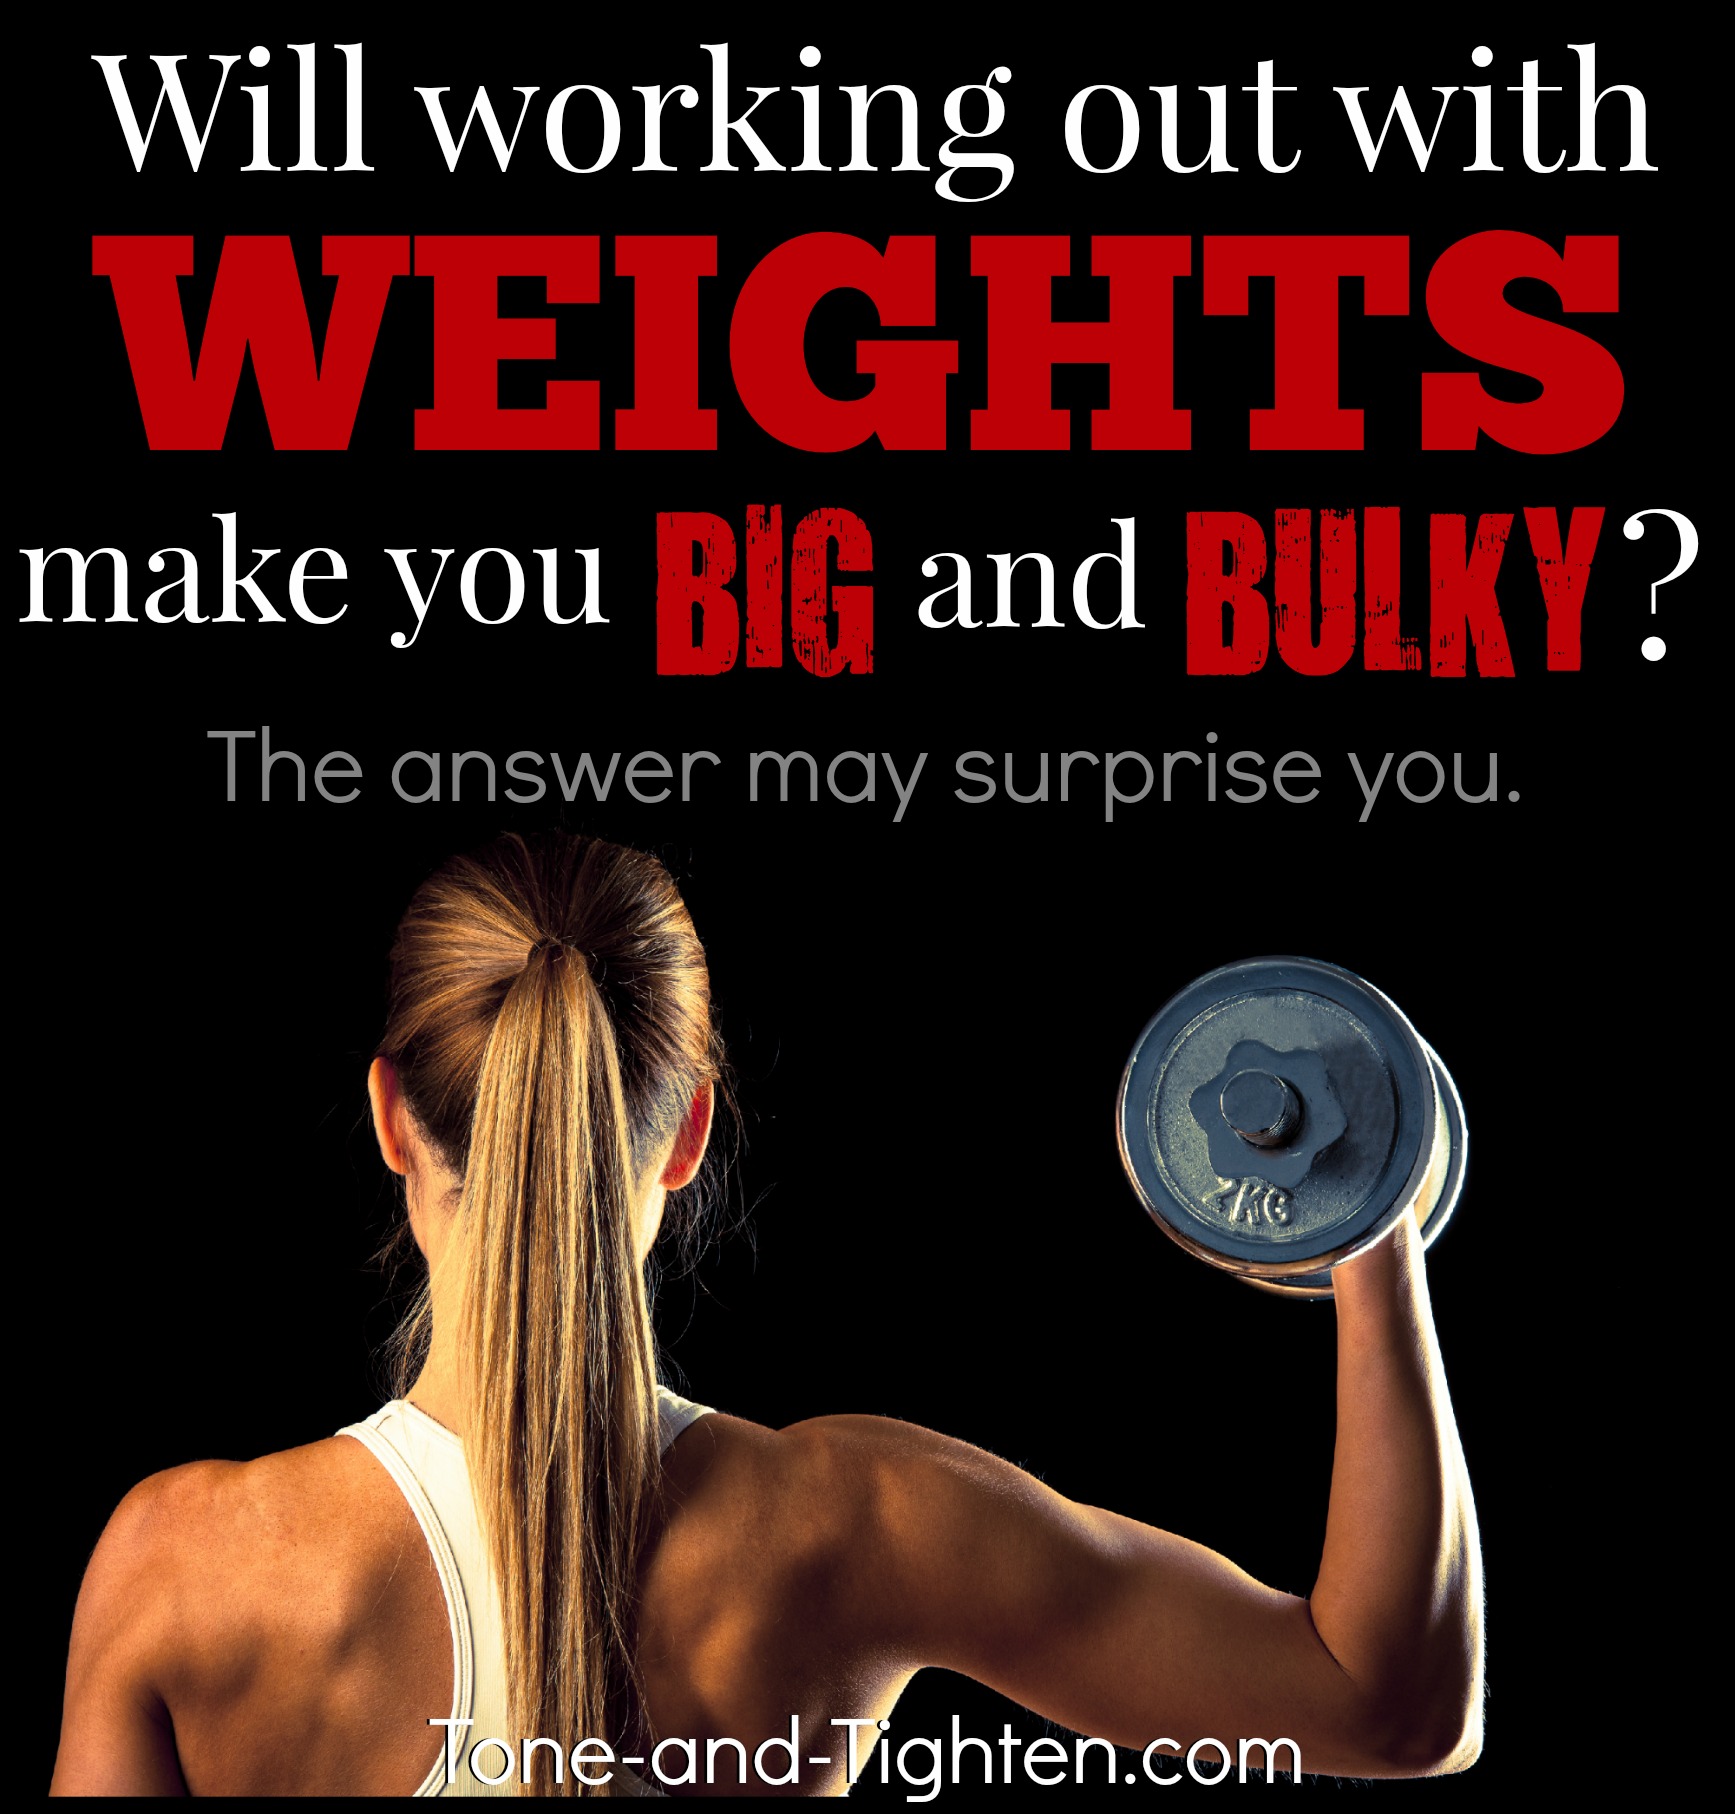 FAQ : If I work out with weights, will I get big and bulky?